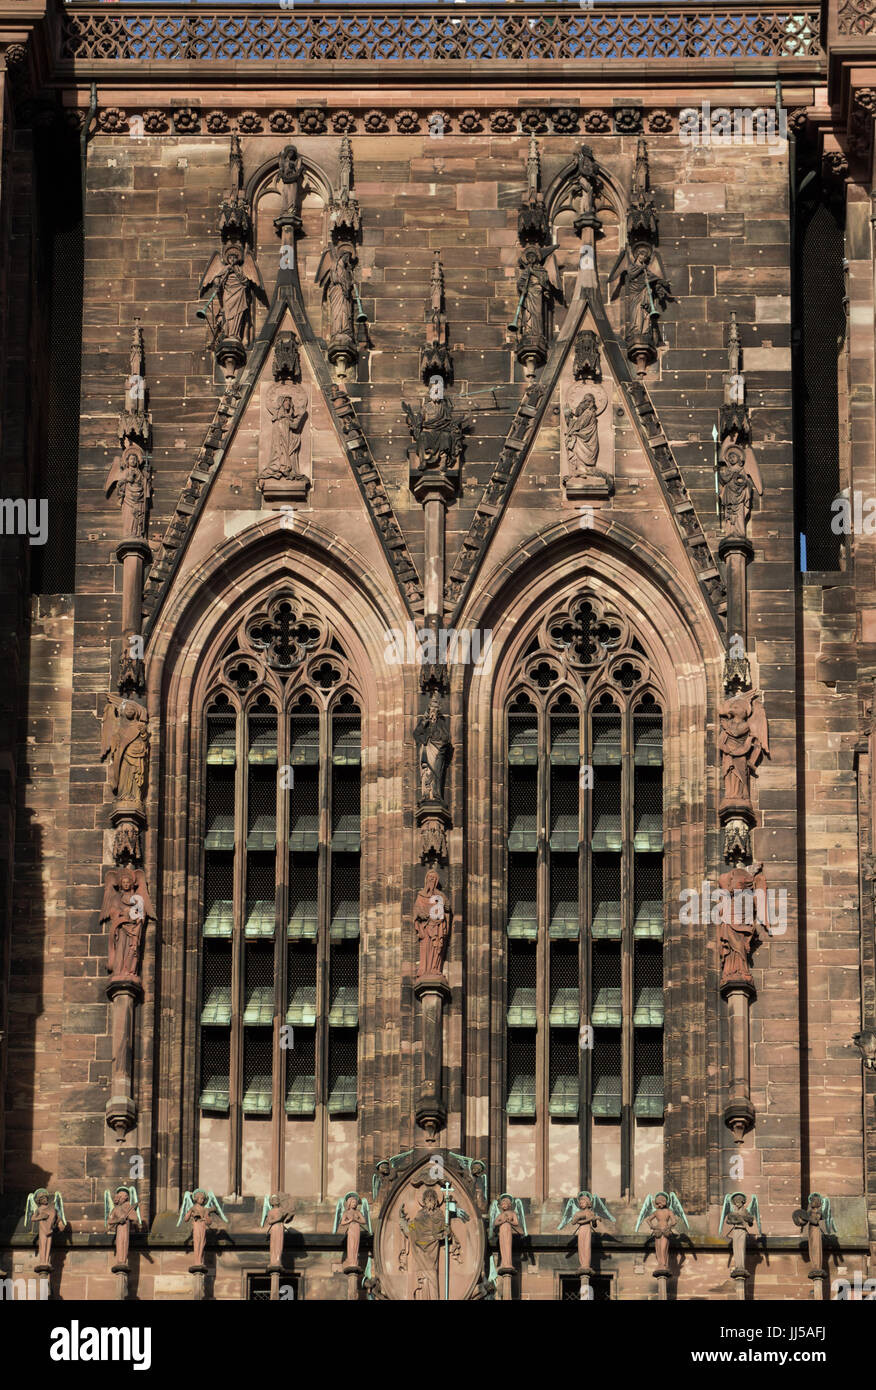 Strasbourg, France - Cathedral of Our Lady of Strasbourg; also known as: Cathédrale Notre-Dame de Strasbourg; architectural detail at facade Stock Photo